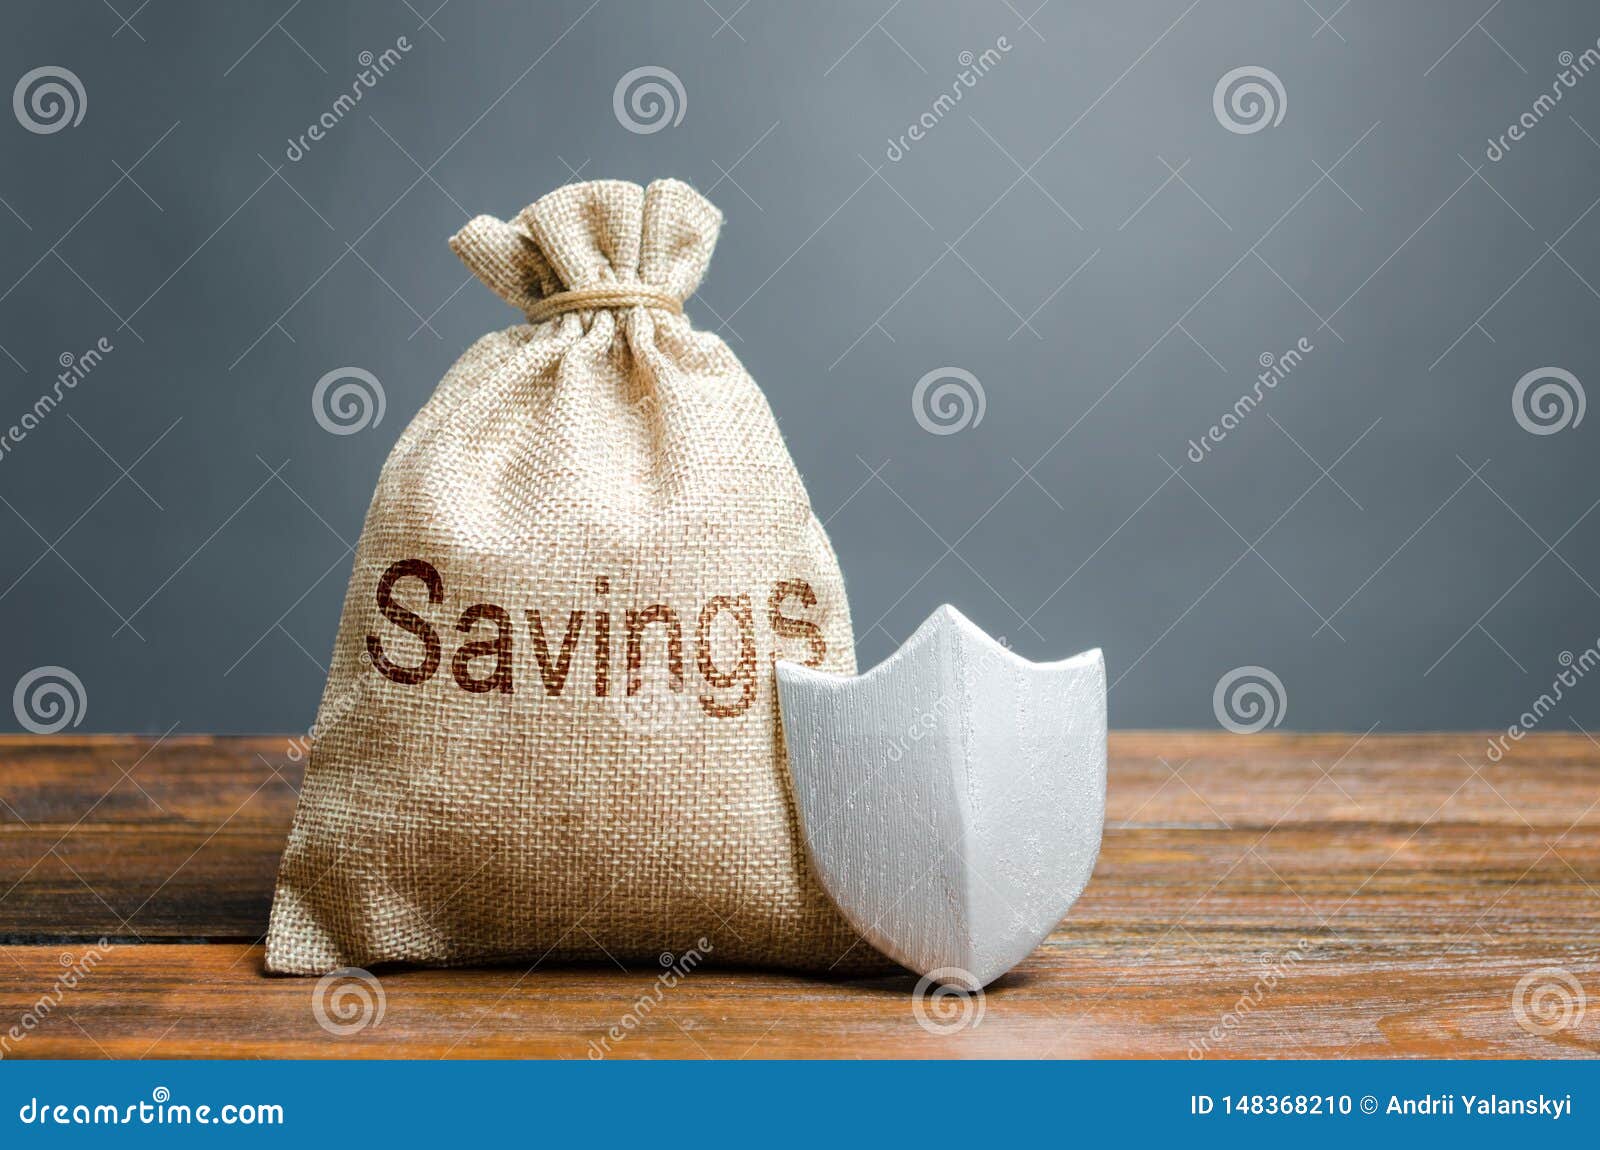 bag with the words savings and protection shield. concept of protection of savings and cash, guaranteed deposits.